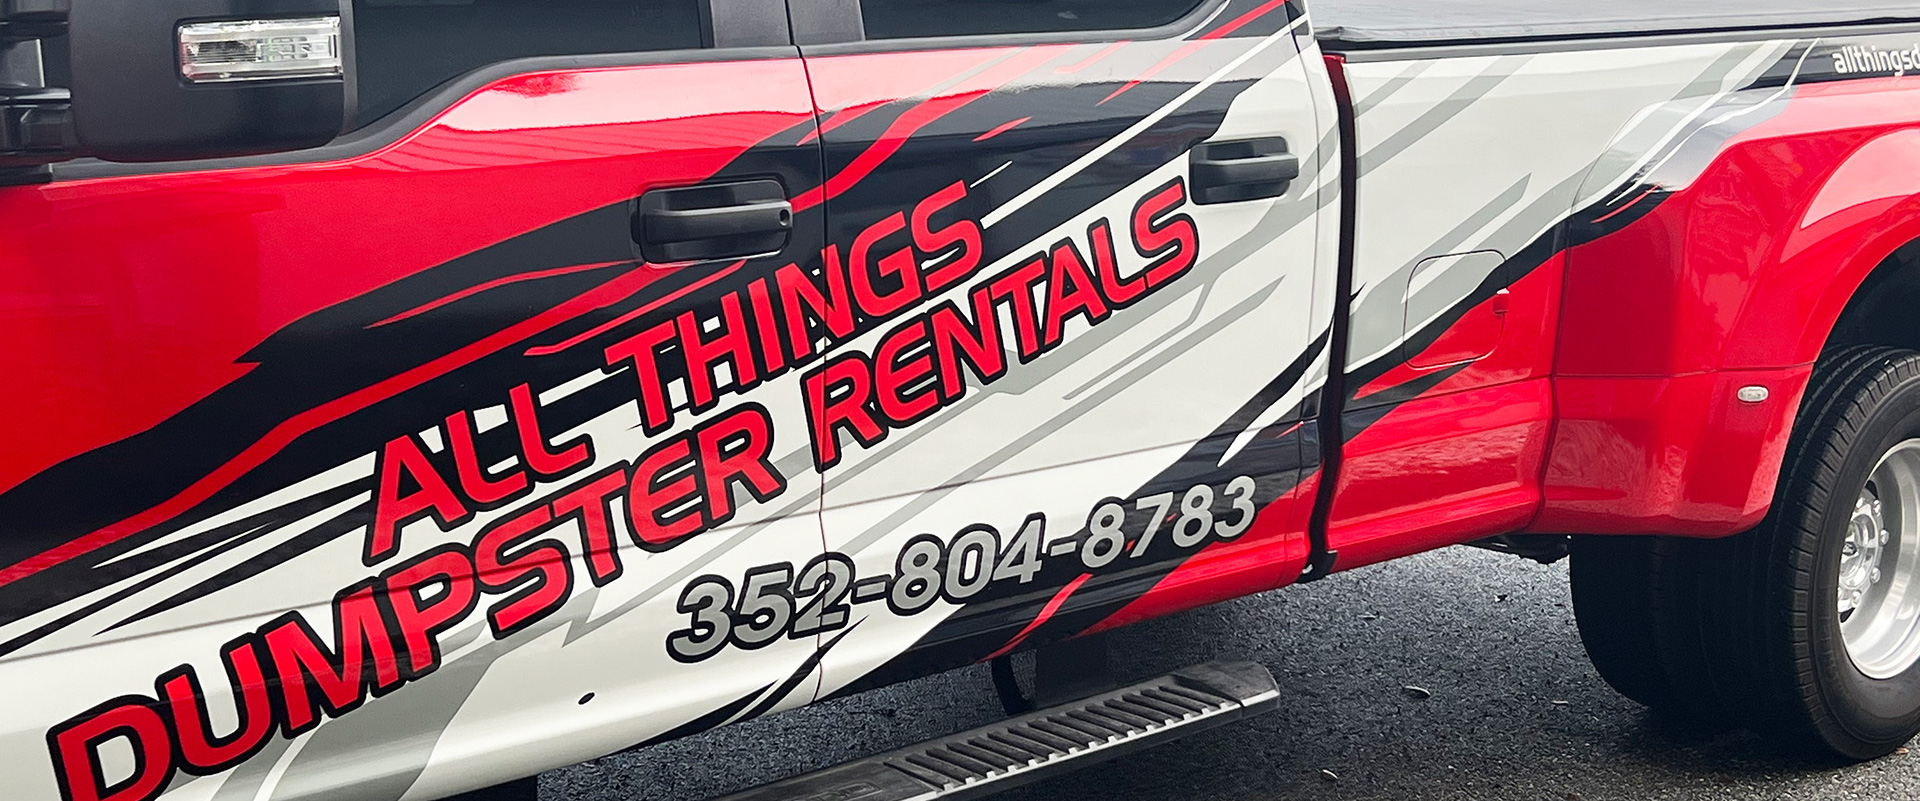 Small Dumpster Rental Silver Springs Florida